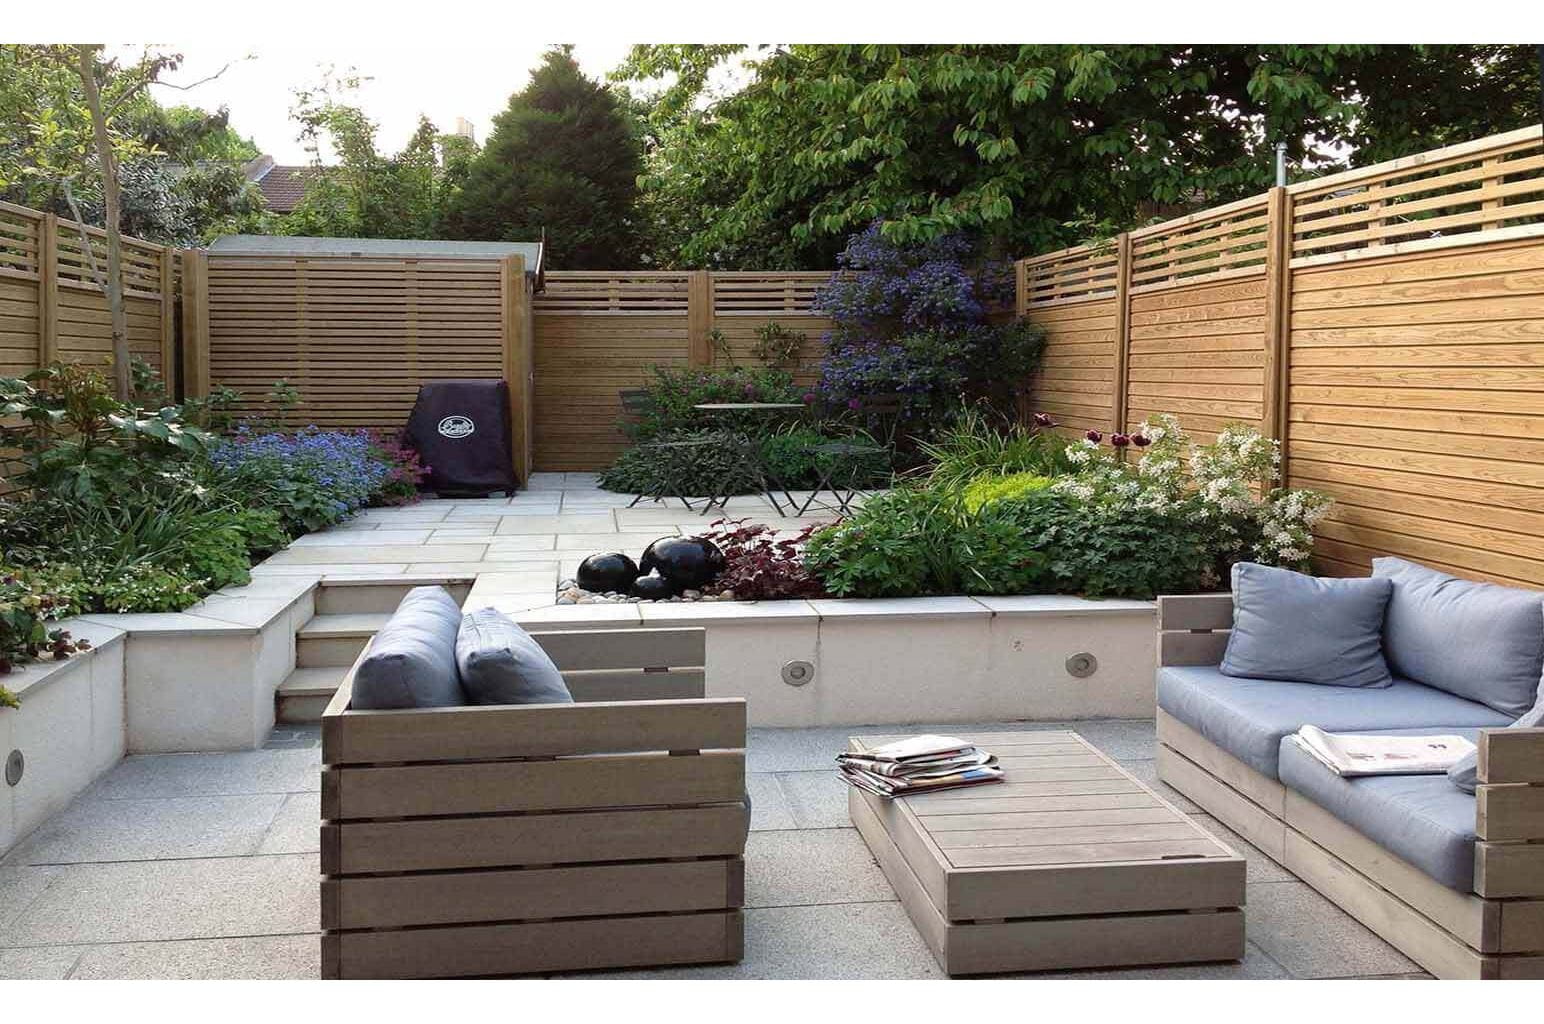 Solid privacy fence panels with slatted top